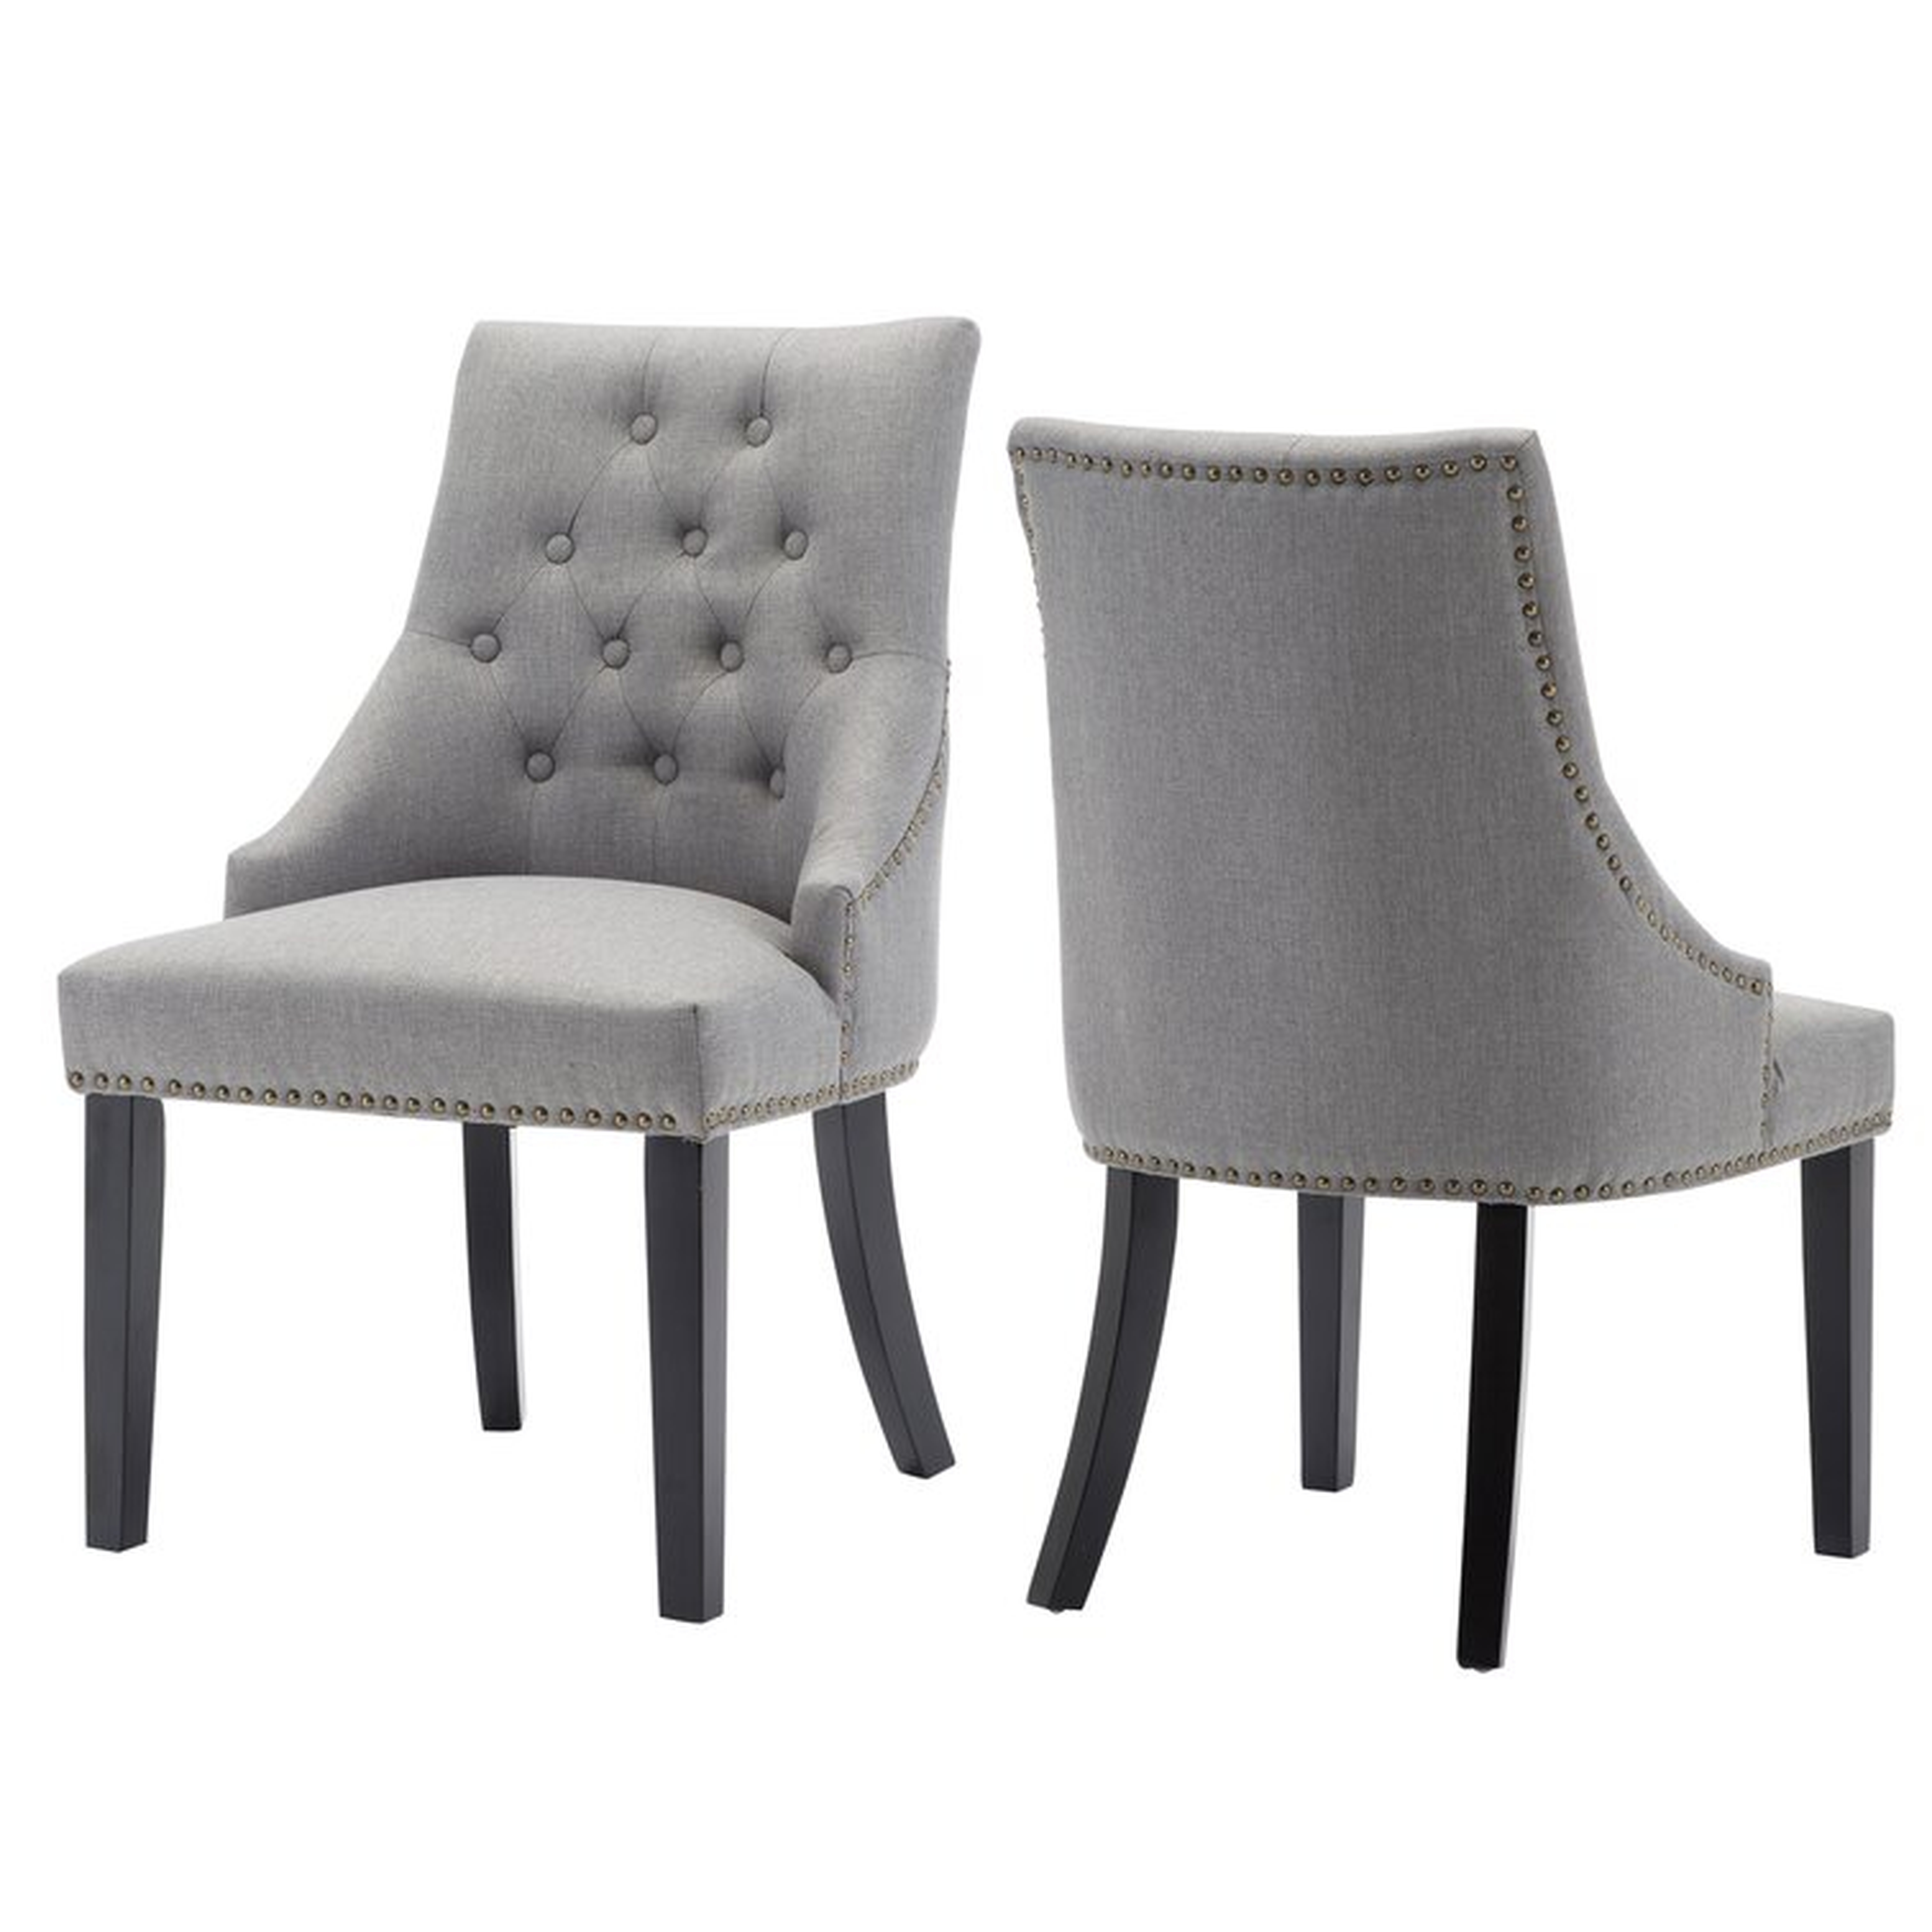 Hopkint Tufted Upholstered Parsons Chair (set of 2) - Wayfair